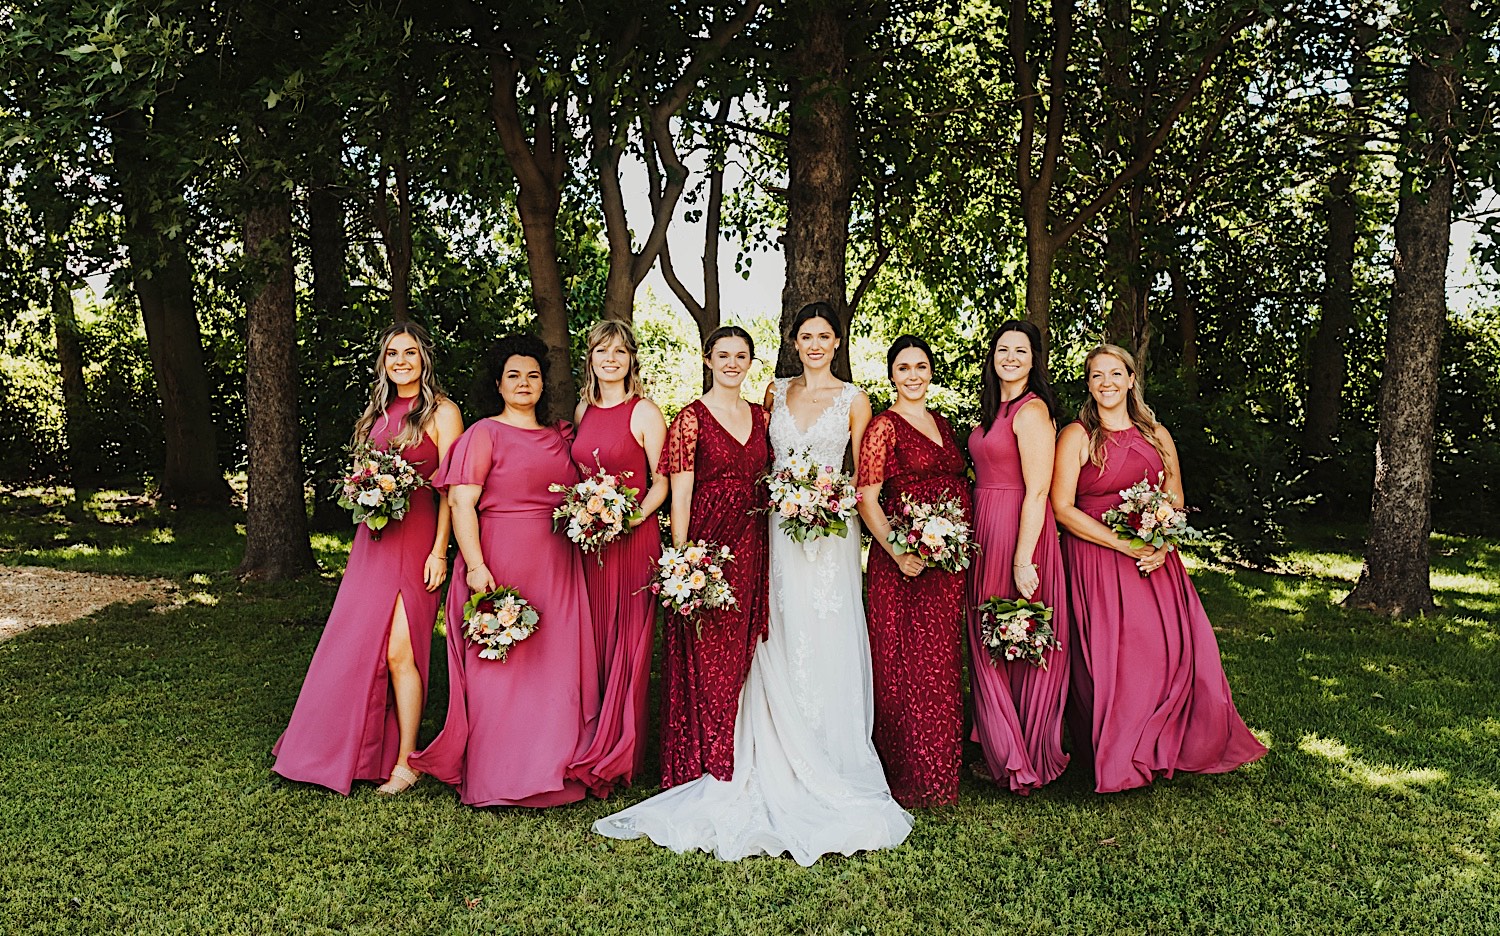 A bride smiles as she stands with her wedding party members in front of a row of trees at the wedding venue Legacy Hill Farm